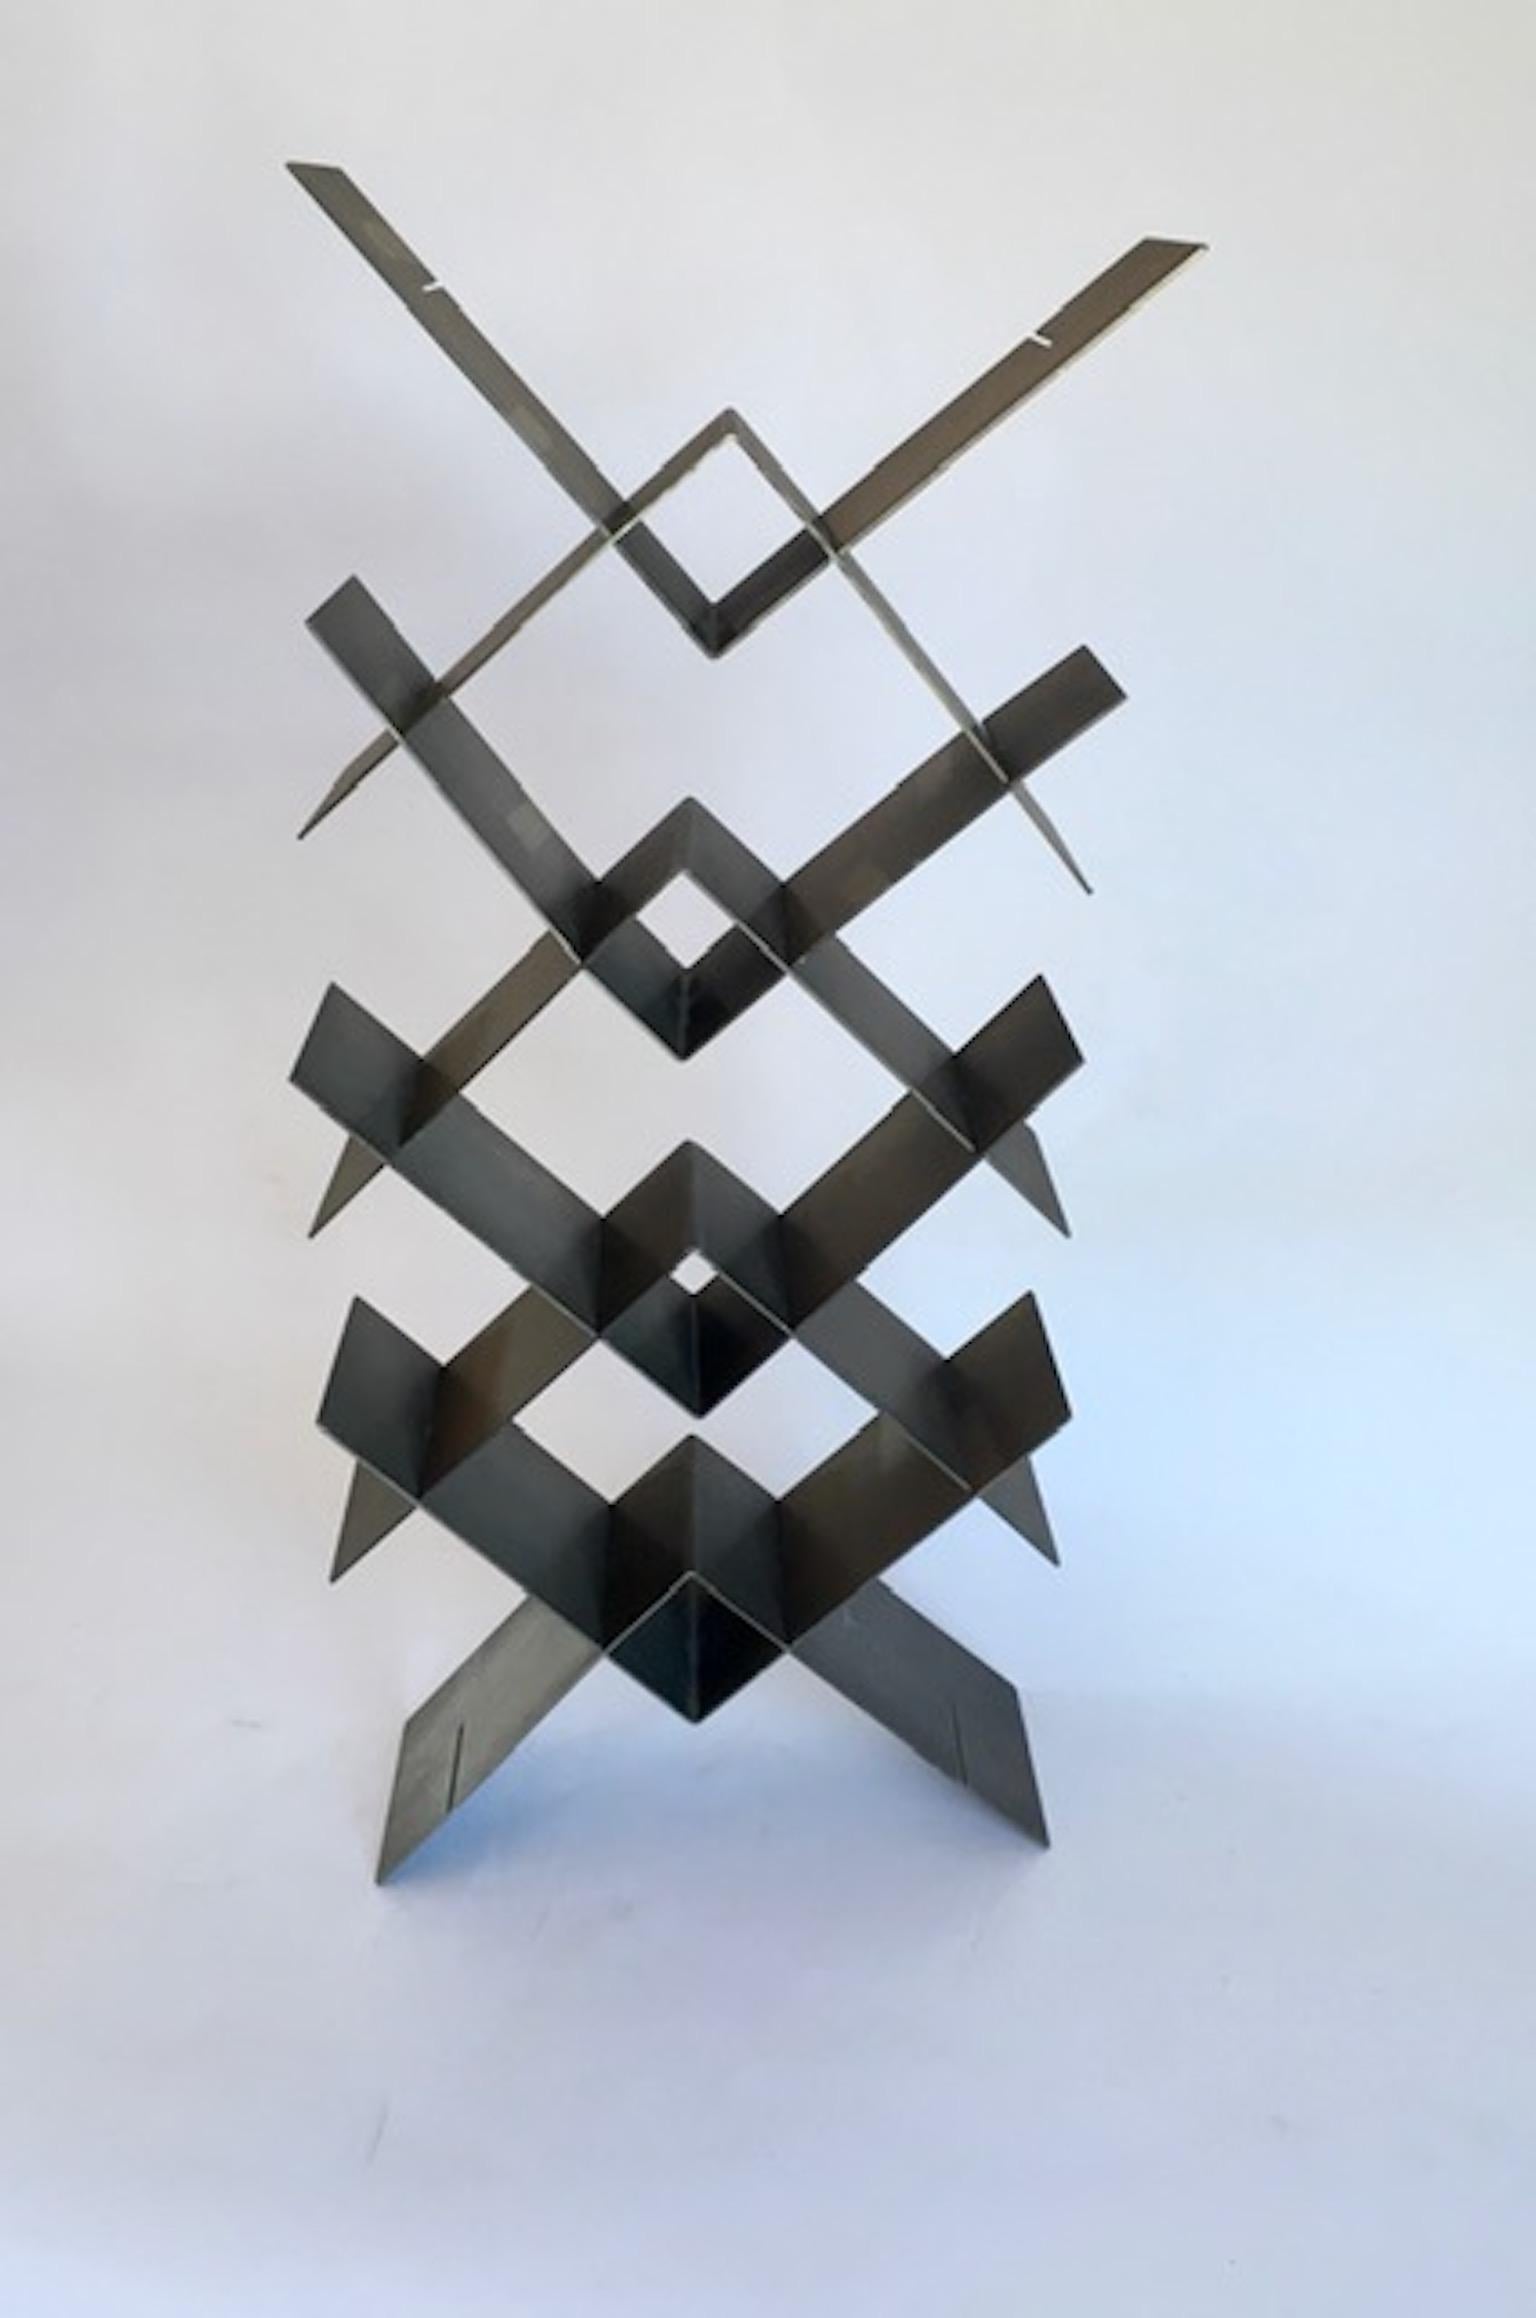 Model sculpture Continua in metal designed by Bruno Munari and produced by Imago in 1975, Italy.
Limited editions of 150 pieces. 
Number 2. Signed.

Biography
Bruno Munari (born October 24, 1907, Milan–died September 30, 1998, Milan) was an